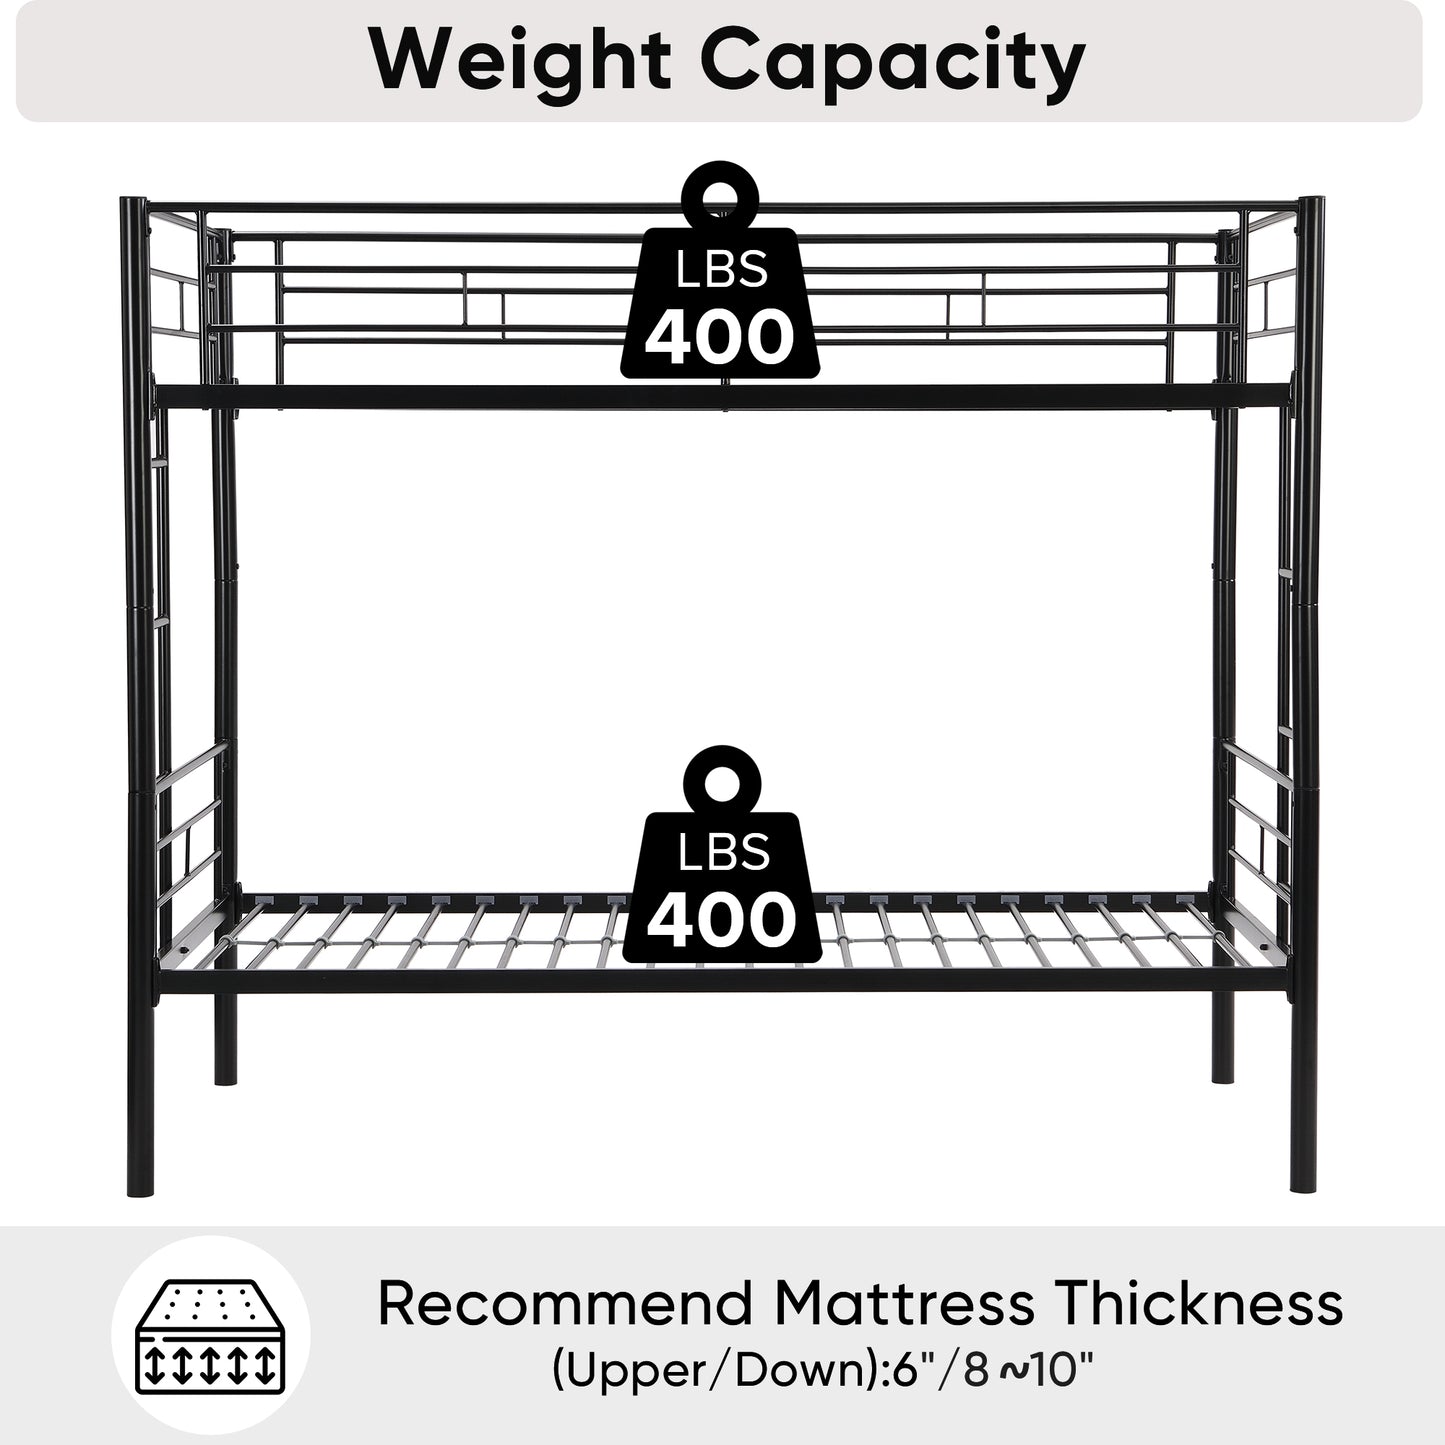 BTMWAY Metal Bunk Bed Twin Over Twin, Convertible Twin Over Twin Bunk Bed with 2 ladders for Kids Bedroom, Heavy Duty Twin Bunk Bed Frame for Bedroom, No Box Spring Needed, Black